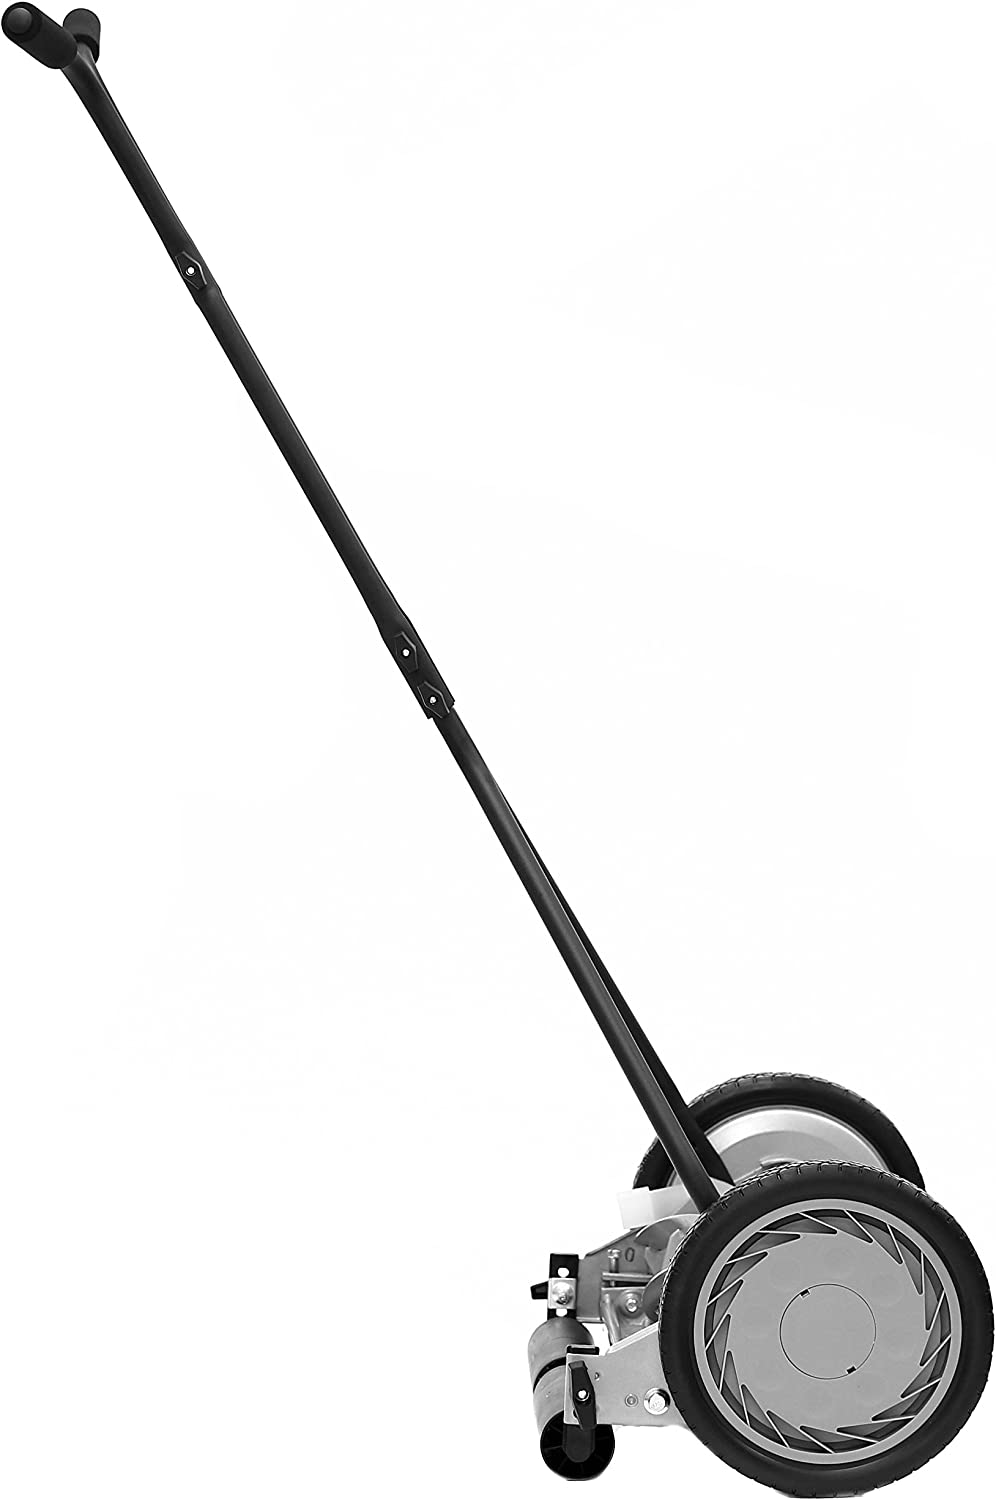 Great States 415-16 16-Inch Reel Mower Standard Full Feature Lawn Mower with T-Style Handle and Heat Treated Blades